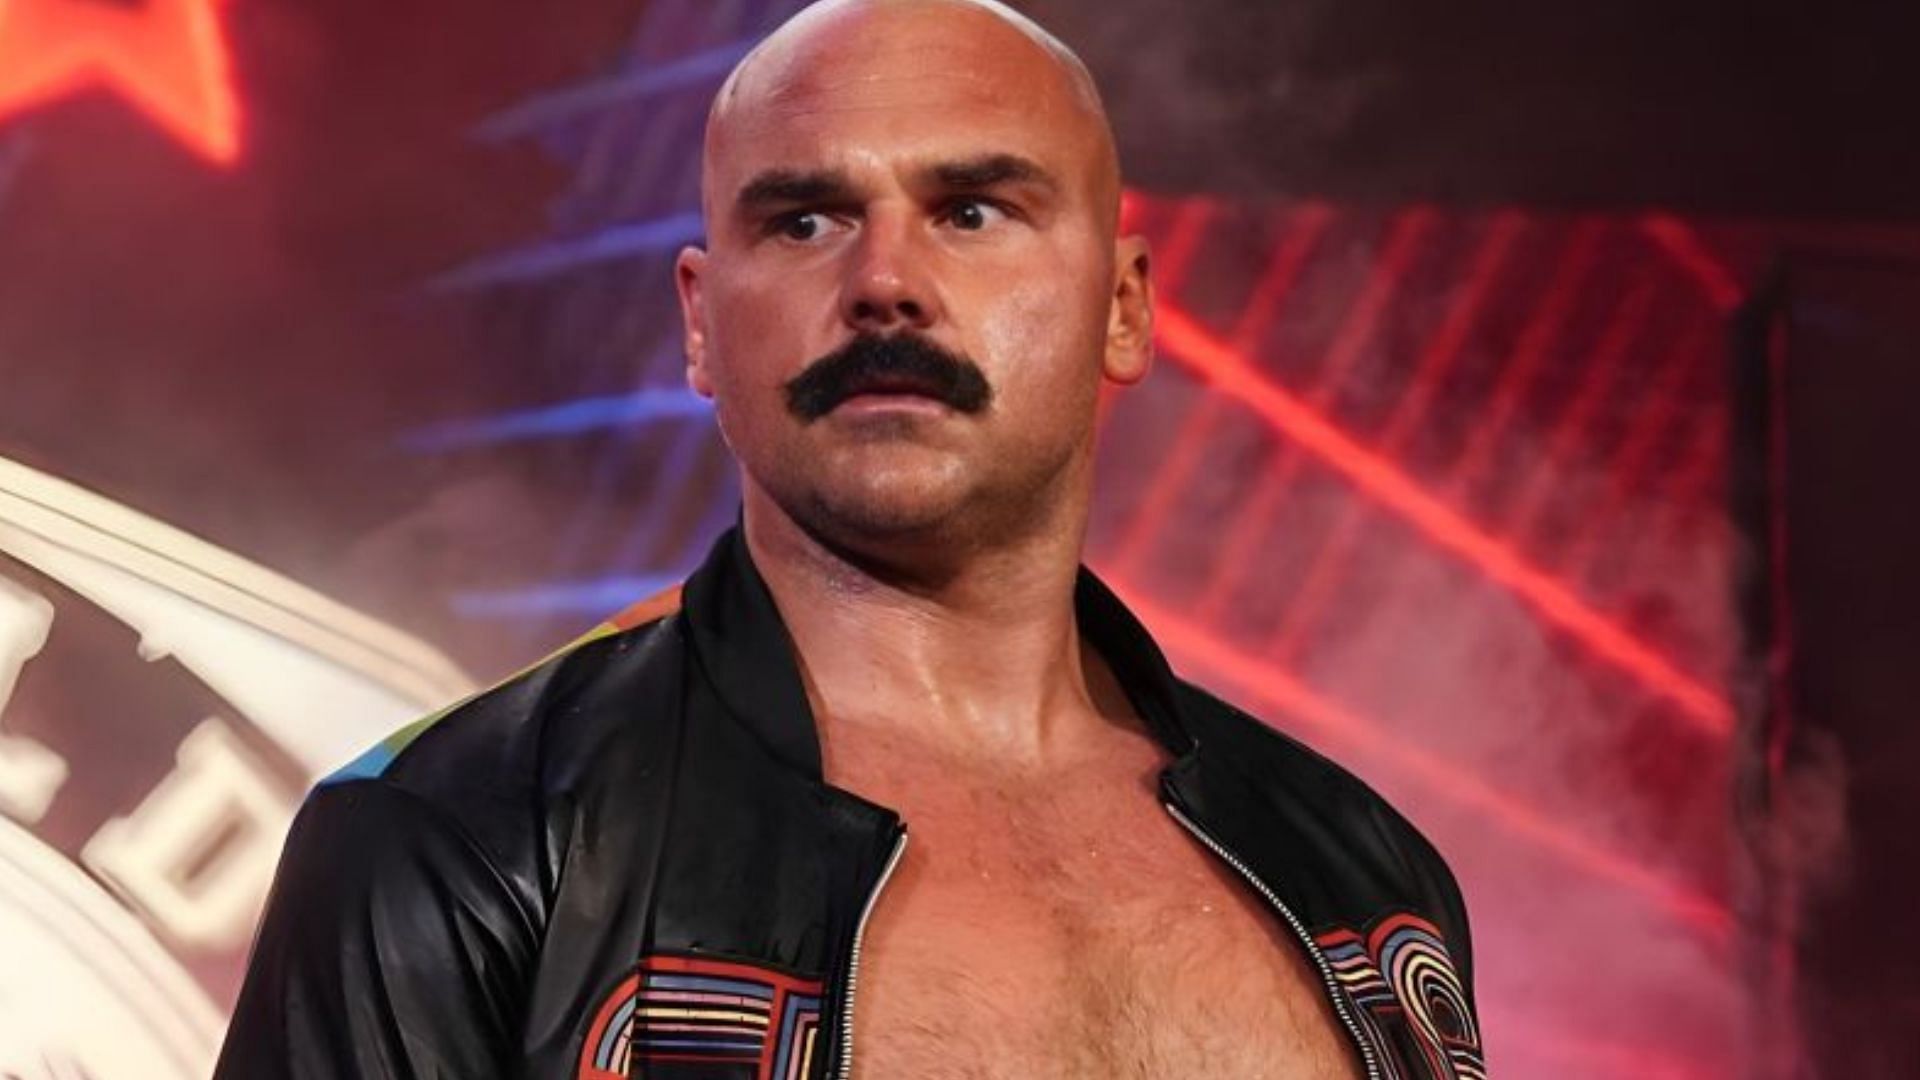 Dax Harwood is a two time AEW World Tag Team Champion